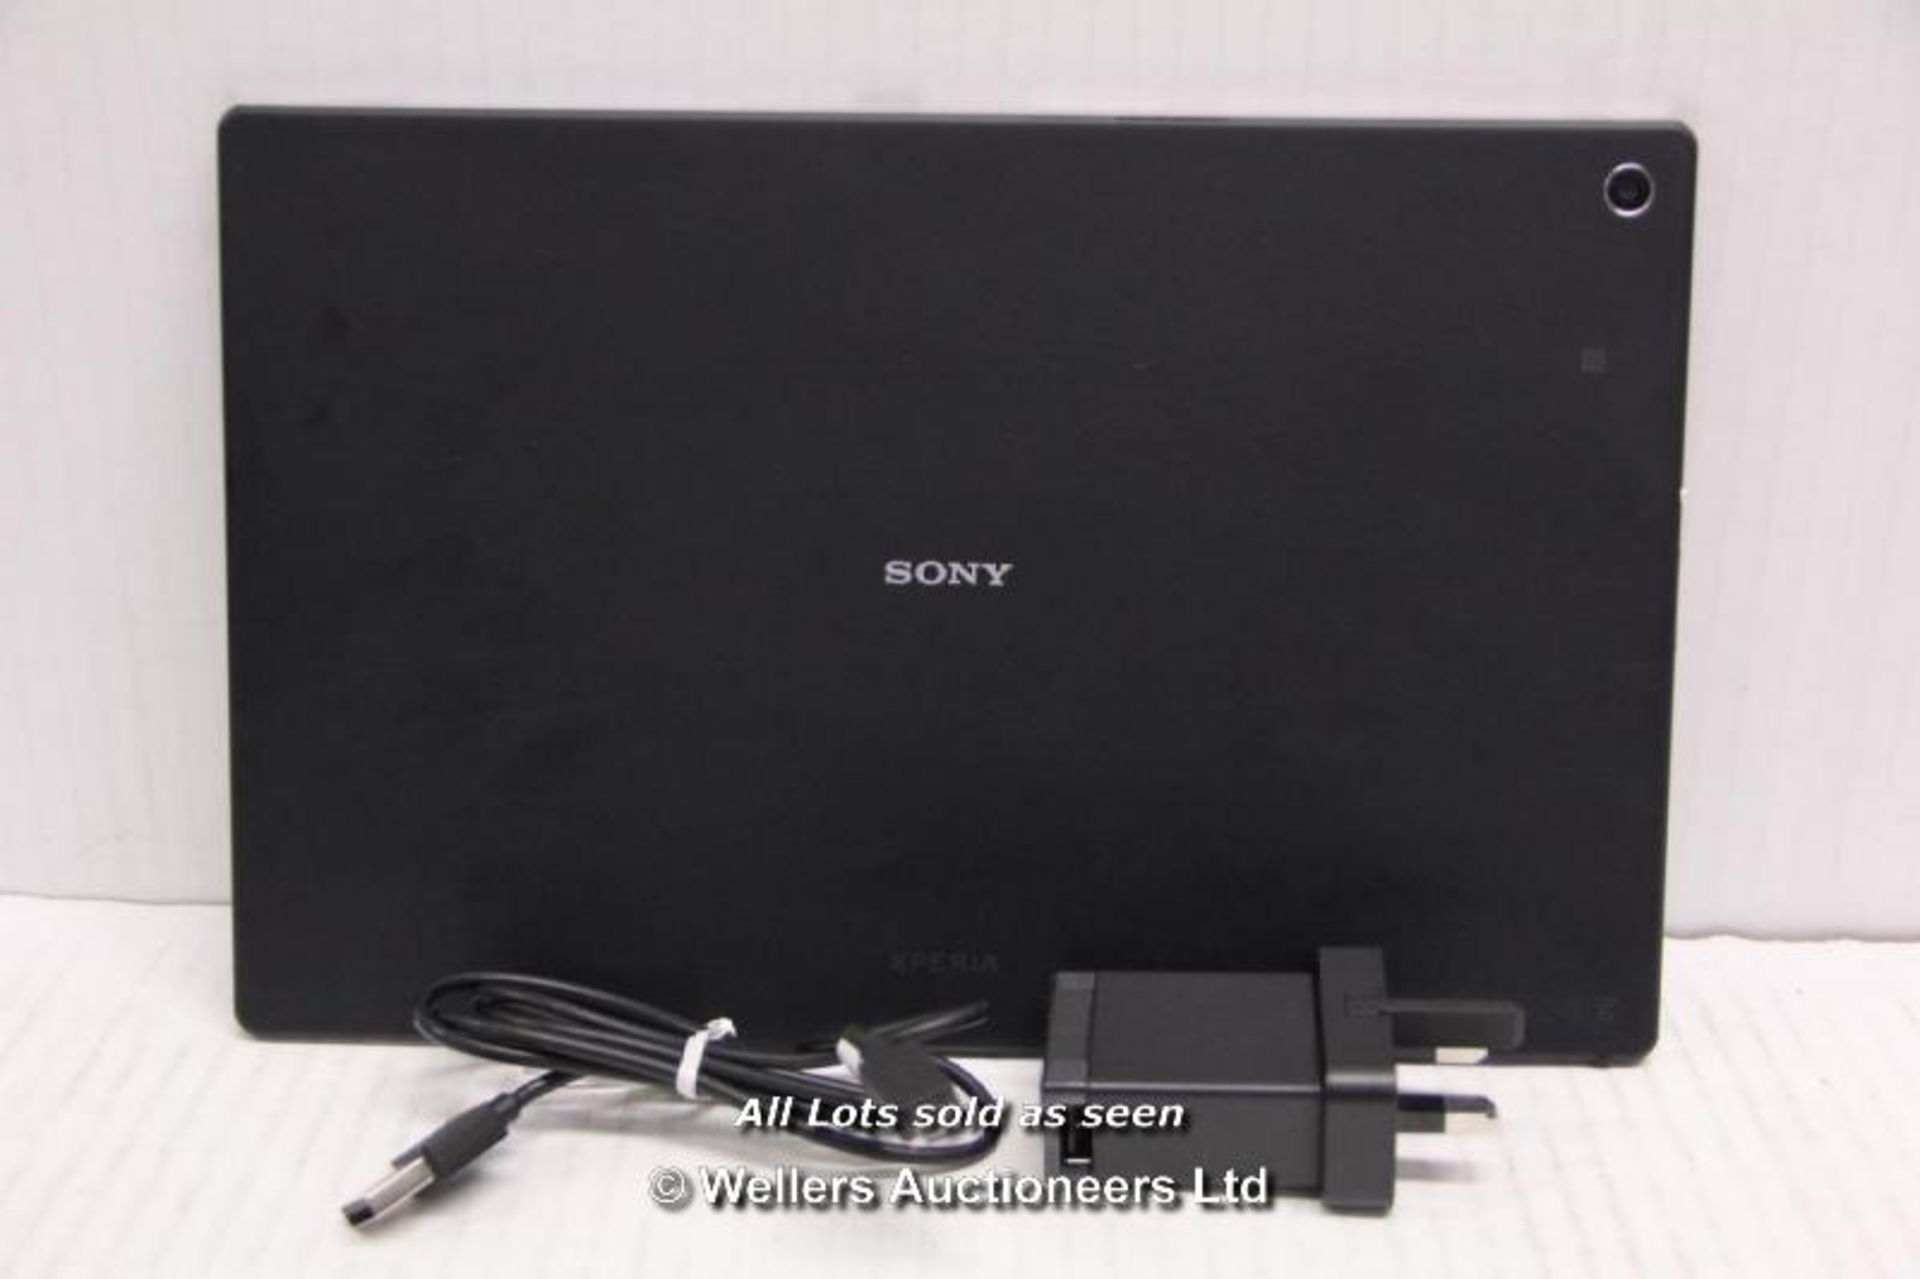 SONY XPERIA Z2 10" TABLET / POWERS ON WITH ANDROID / INCLUDING BATTERY AND CHARGER / SCRATCHES TO - Image 2 of 3